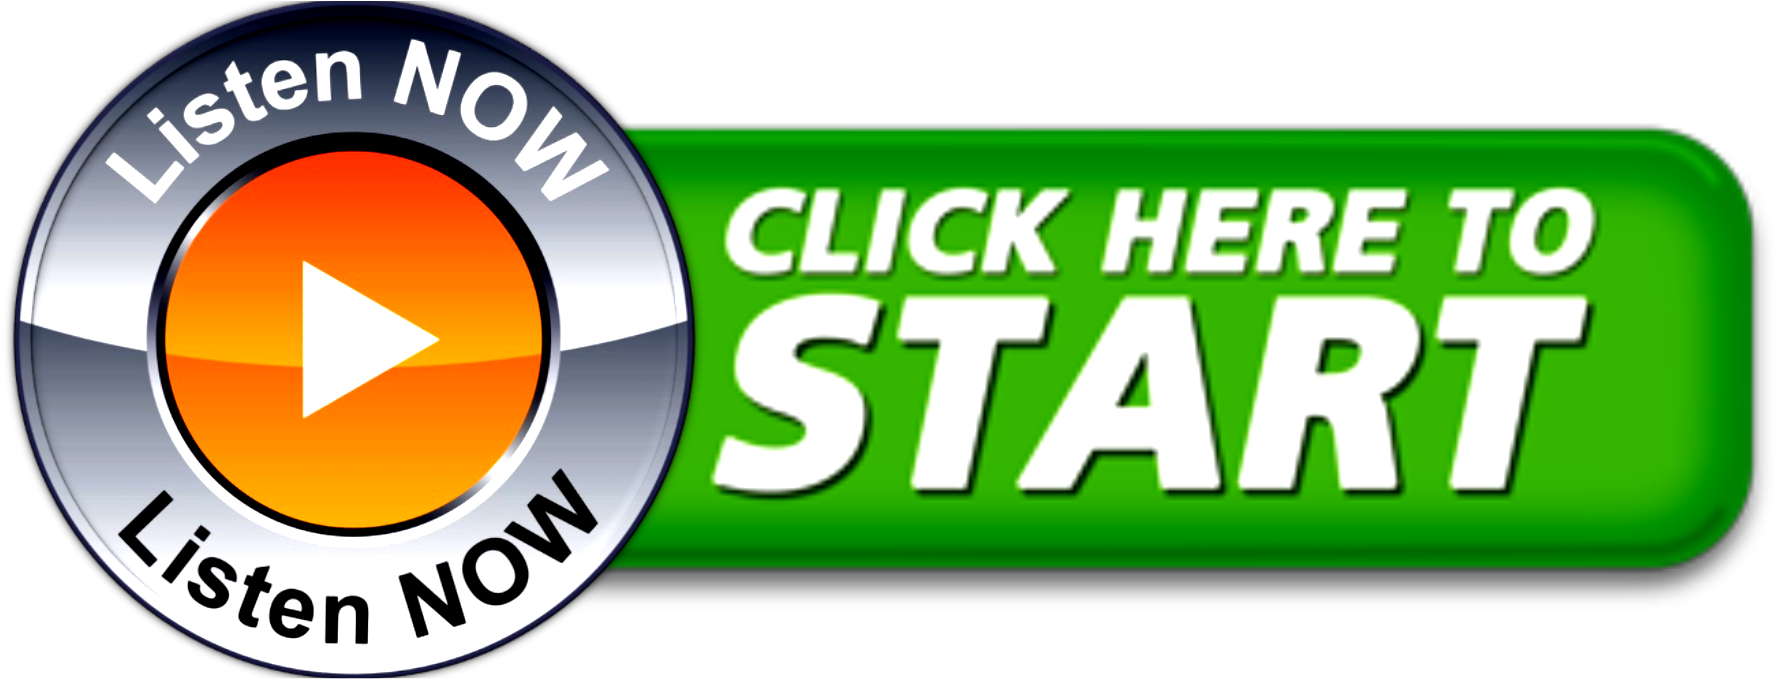 Click Here - Green Start Here Listen Now Button PNG │ Grace Truth Spirit GotLifeQuestions.com #GLQ (1.0.0).png